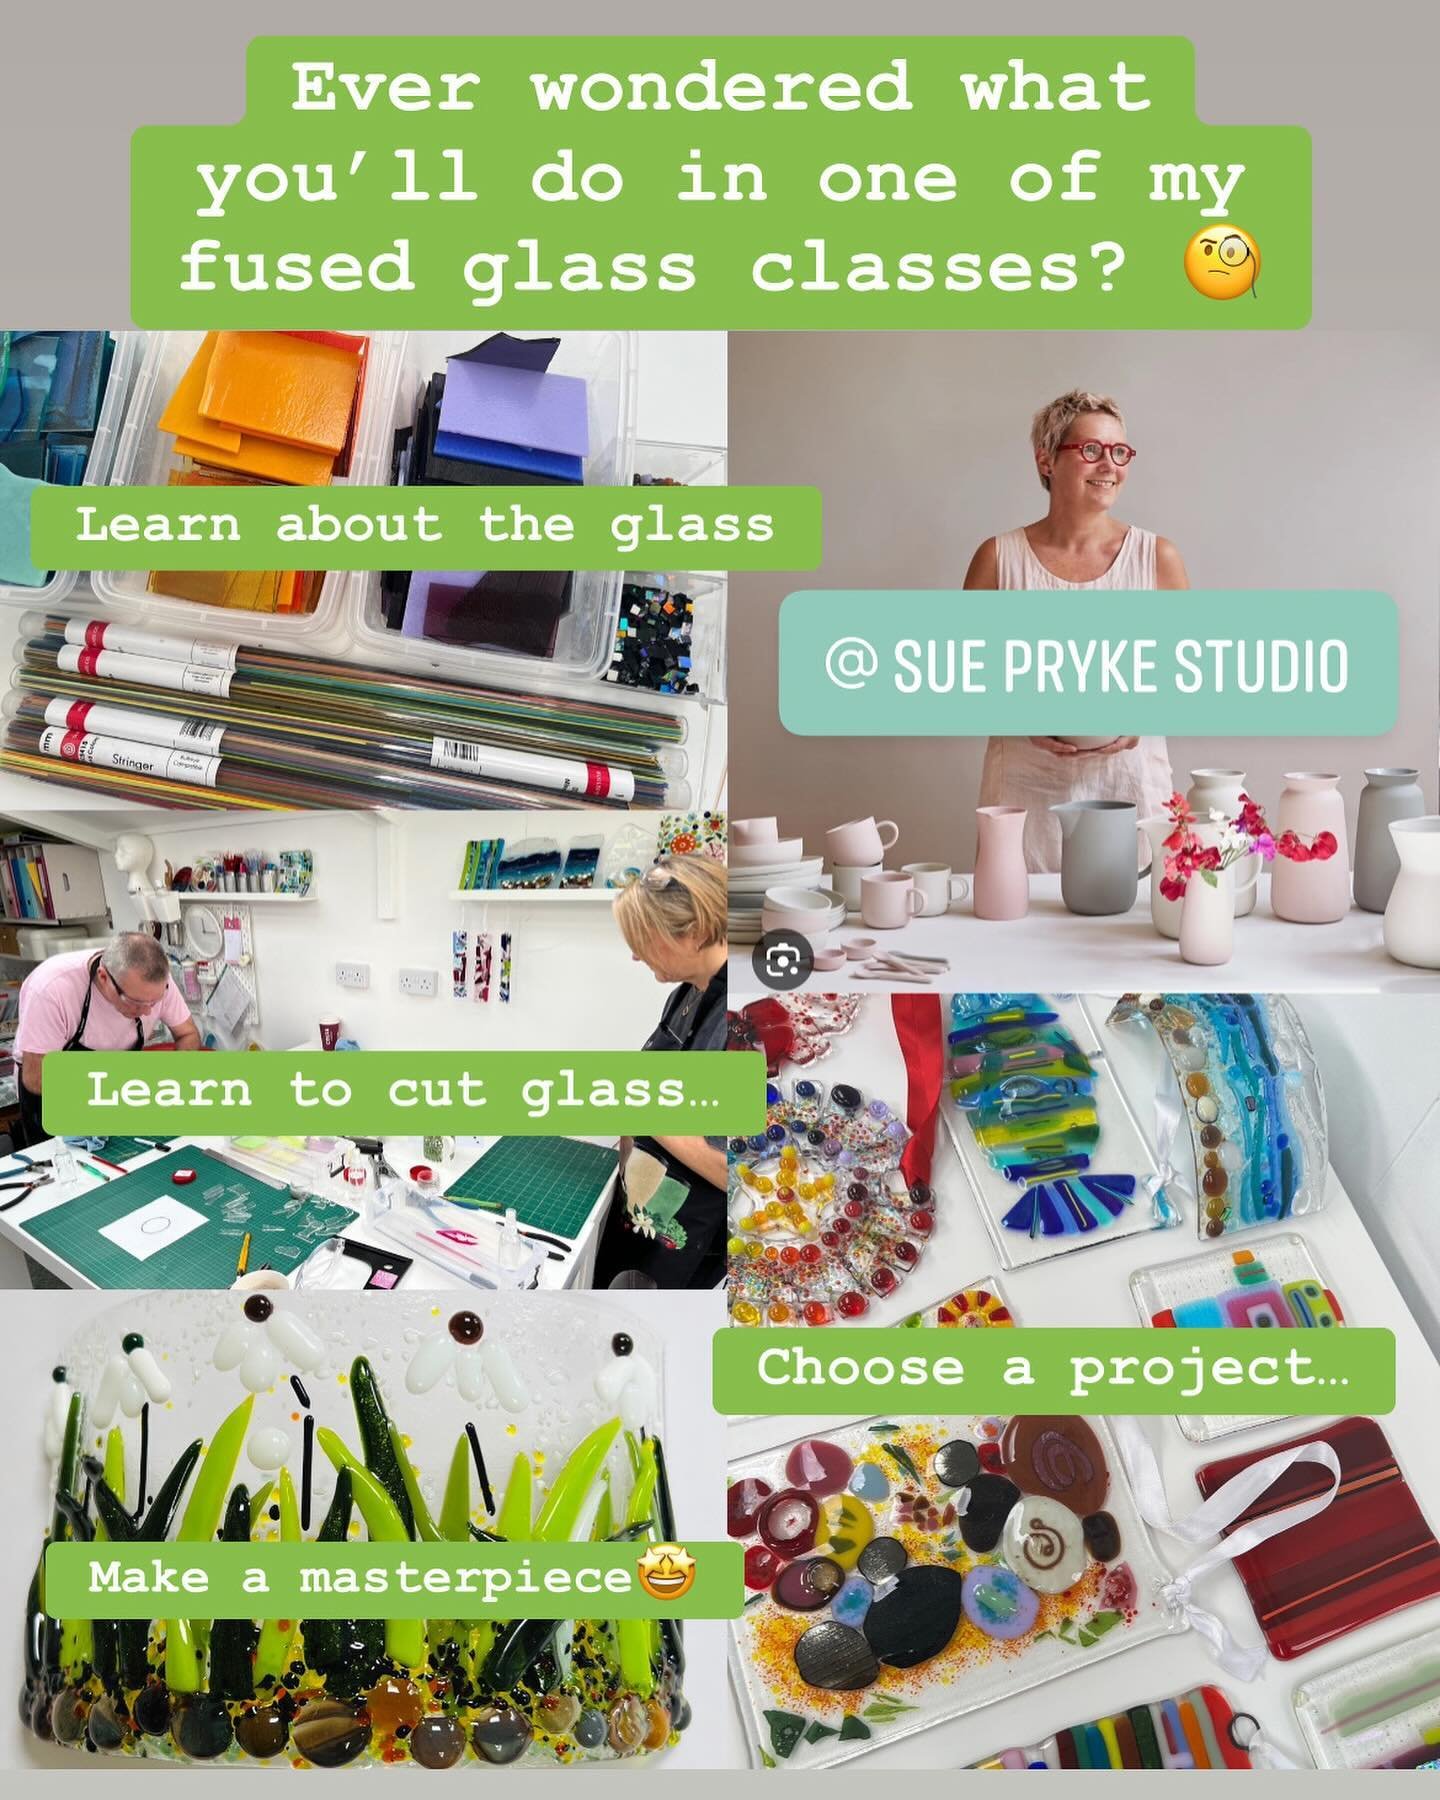 Next class 18th May, 10-1, at the Sue Pryke studio. There are spaces still available and you can book through my website, link in bio🌼

#metime #becreative #daisyglass #fusedglassclass #glassclass #glassworkshop #homestudio #daisyglassstudio #adultl